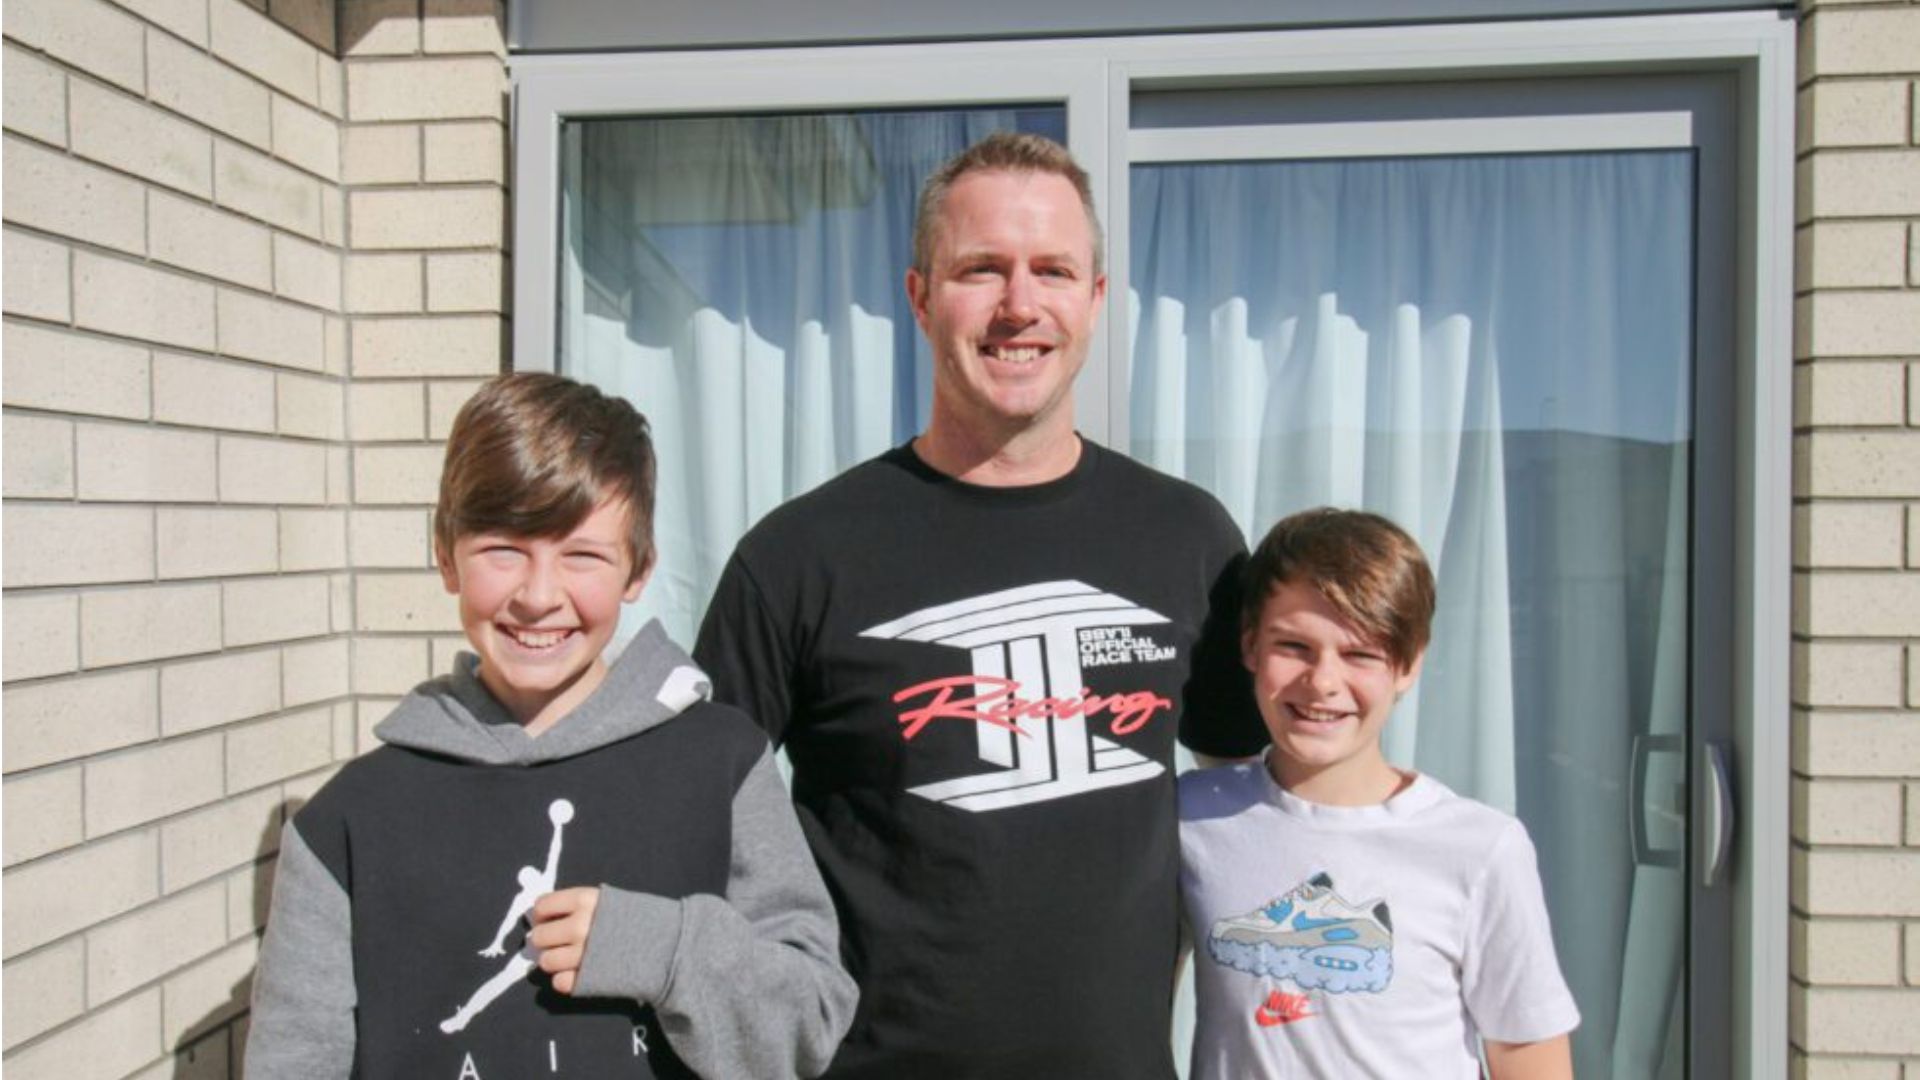 Mark and his sons are on their journey to home ownership through Habitat for Humanity Northern's Progressive Home Ownership Porgramme that operates as a rent-to-buy model.